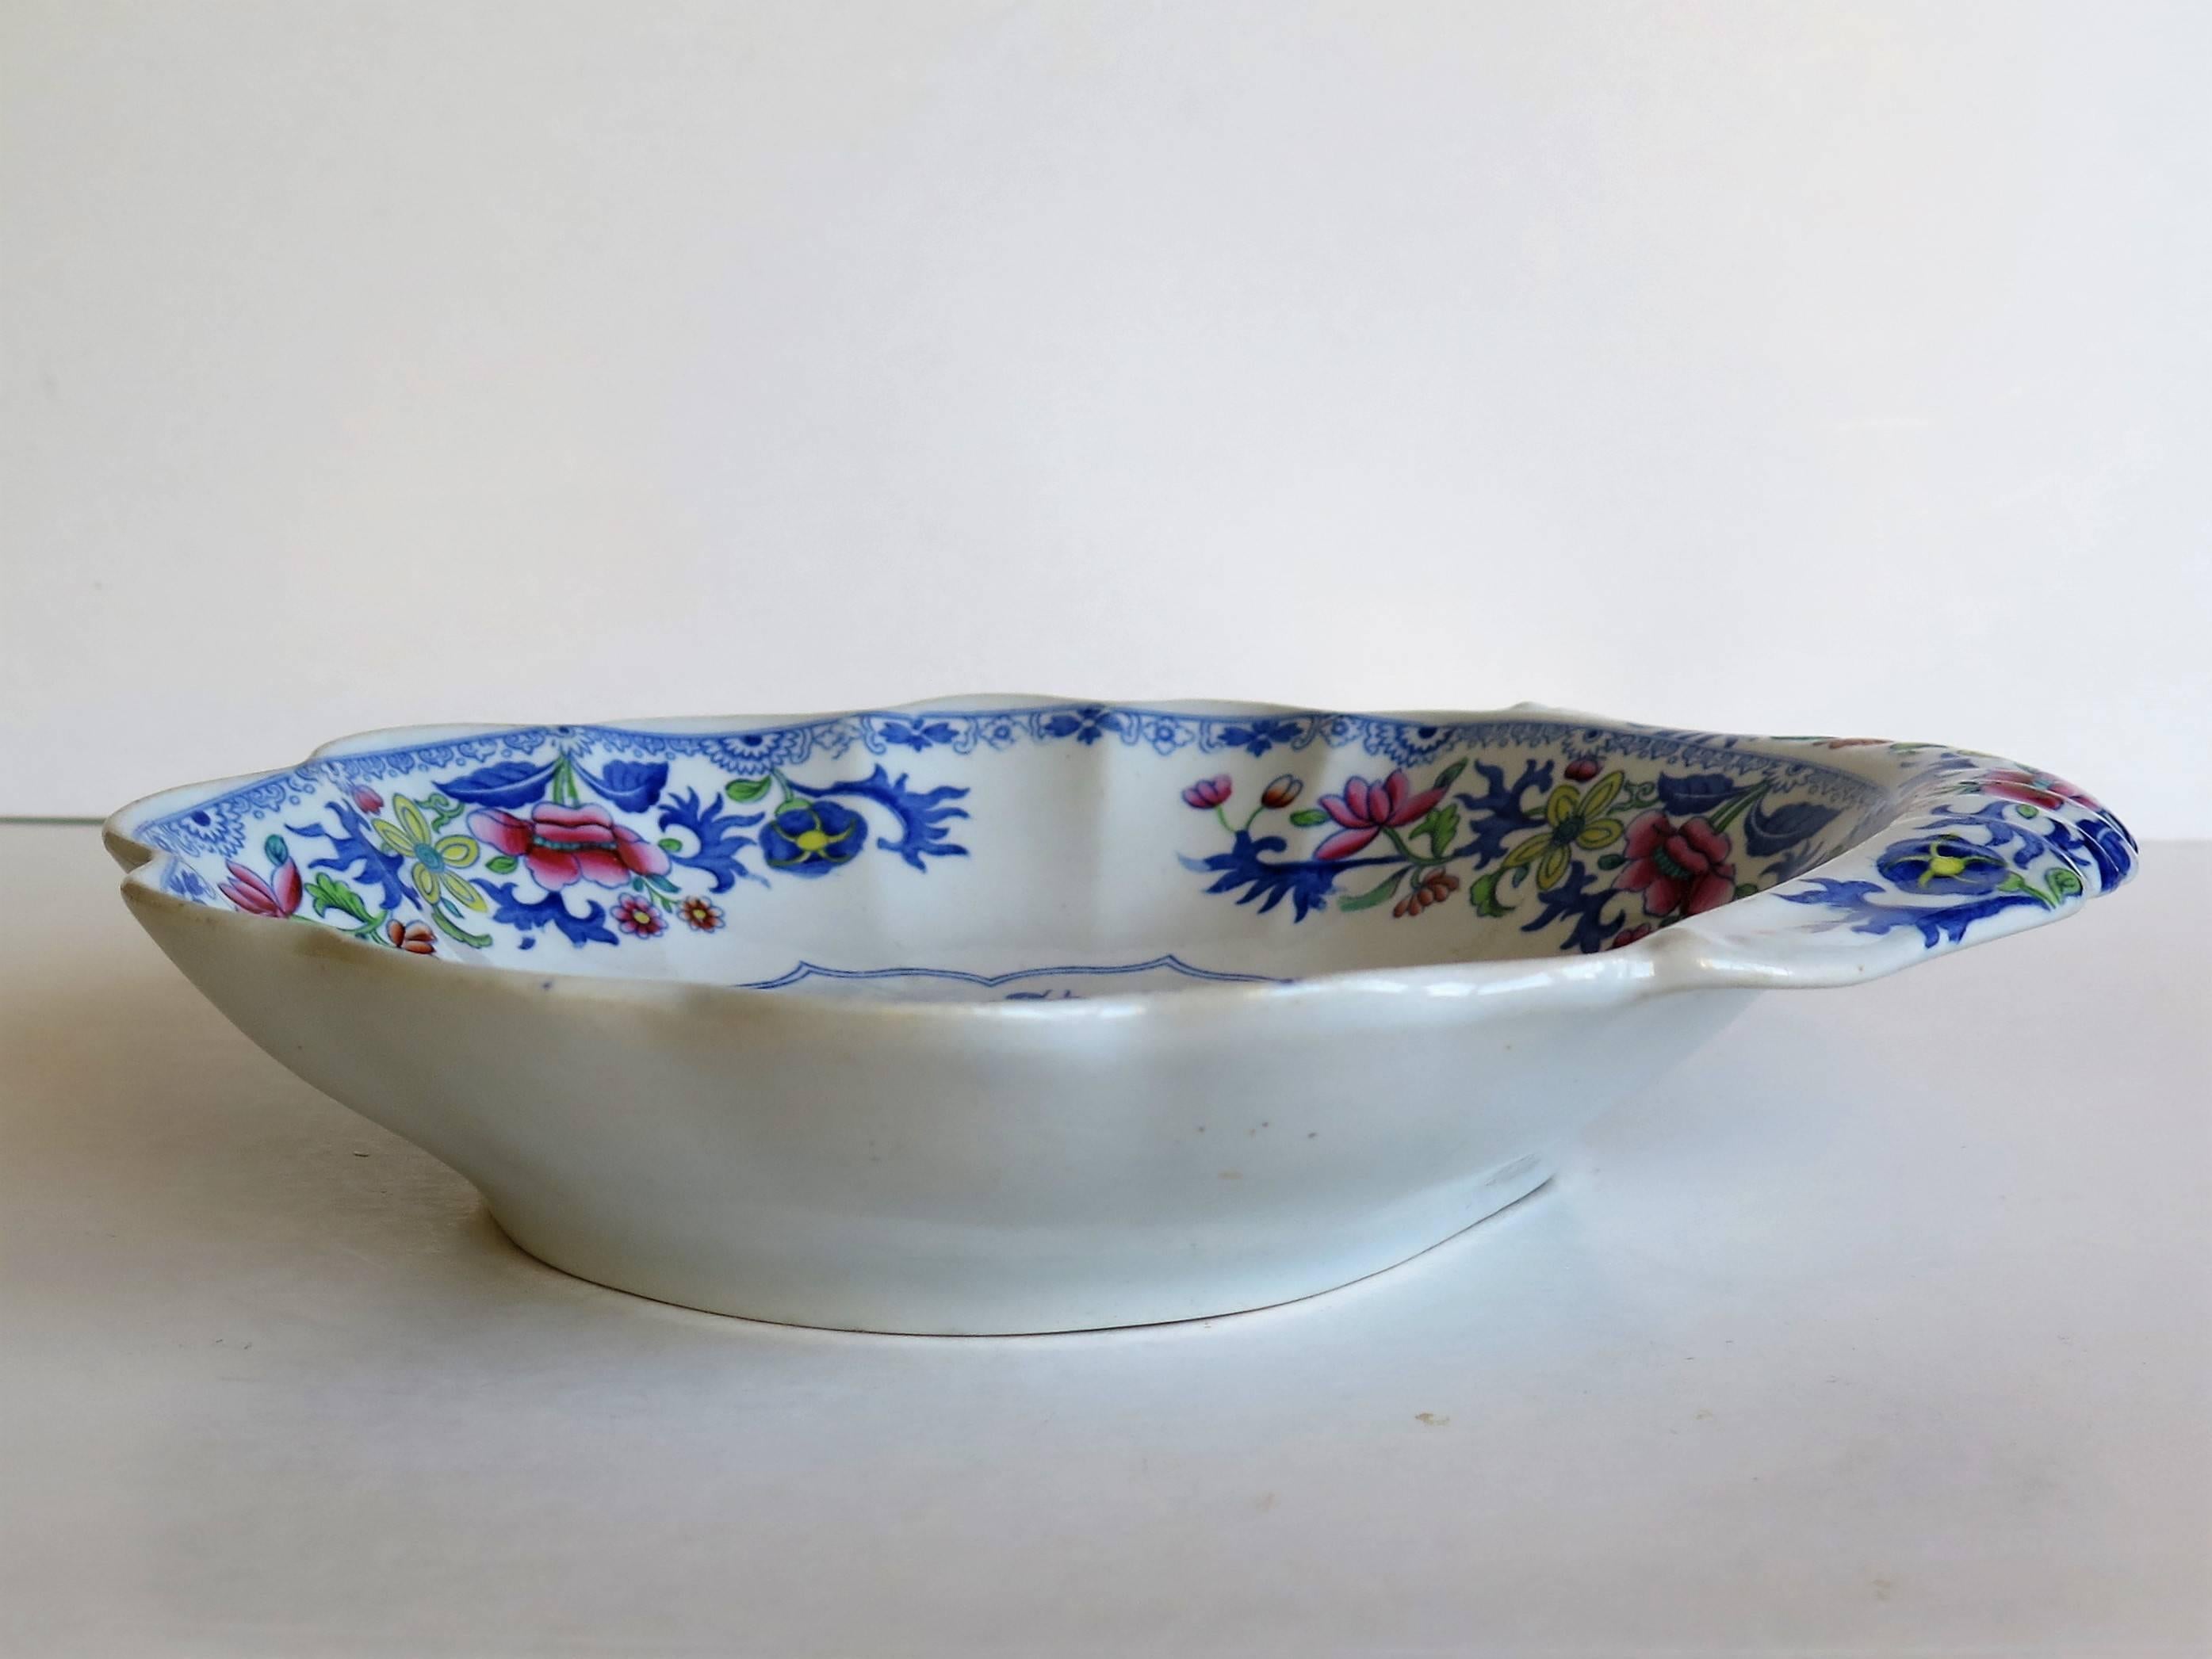 English Georgian Spode Ironstone Shell Dish or Plate Bang Up Pattern No. 2886, Ca 1820 For Sale